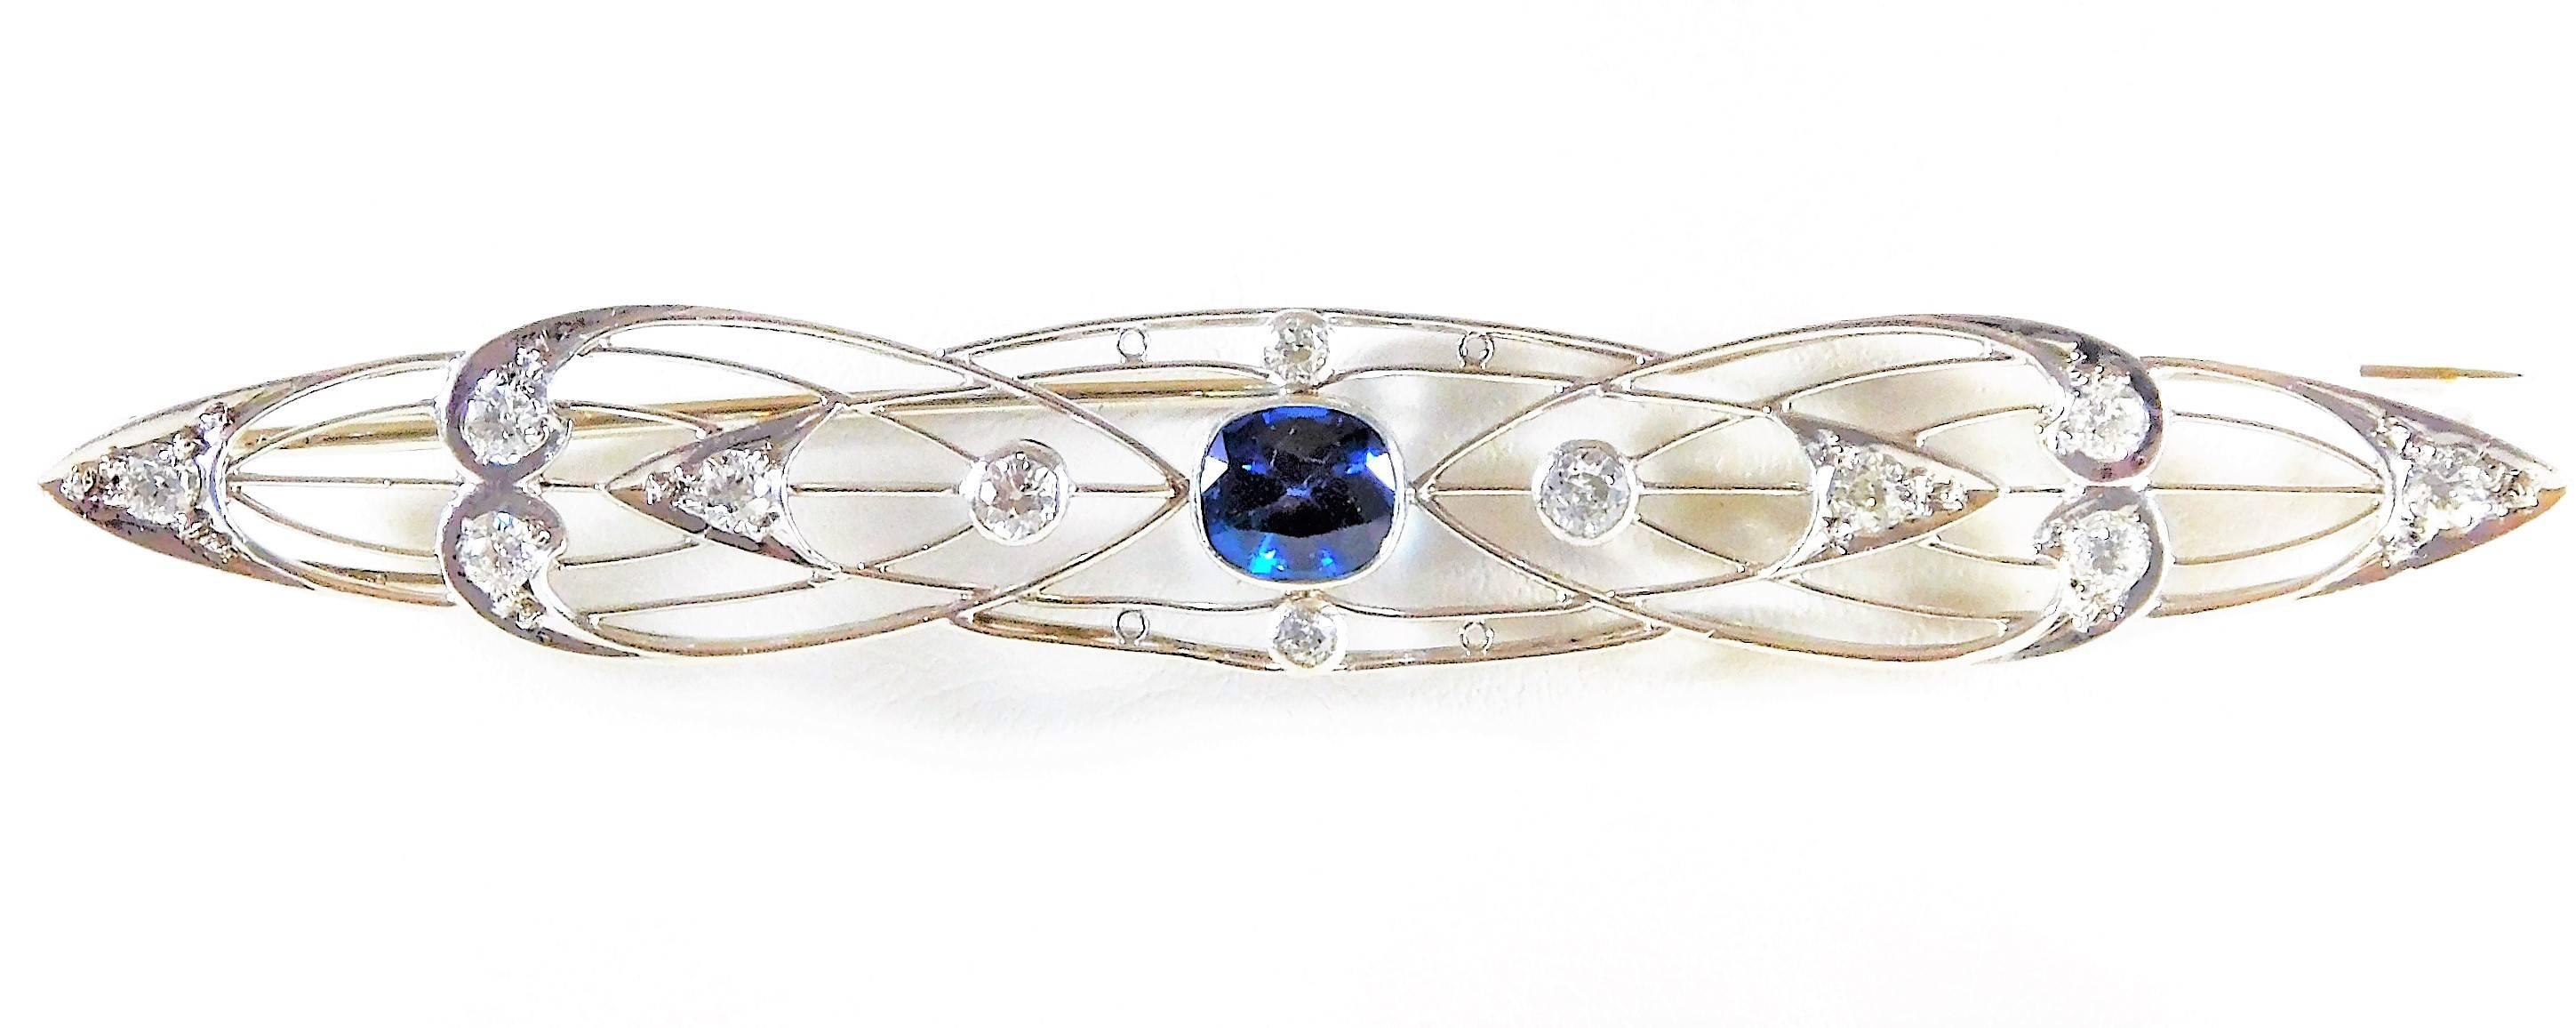 Edwardian Antique Platinum and Diamond Bar Pin with 1ct Sapphire

An estate piece. Antique bar pins were all the rage back in the early 1900’s. Much like brooches, bar pins have a bar hinged on one end with a locking mechanism on the other. They